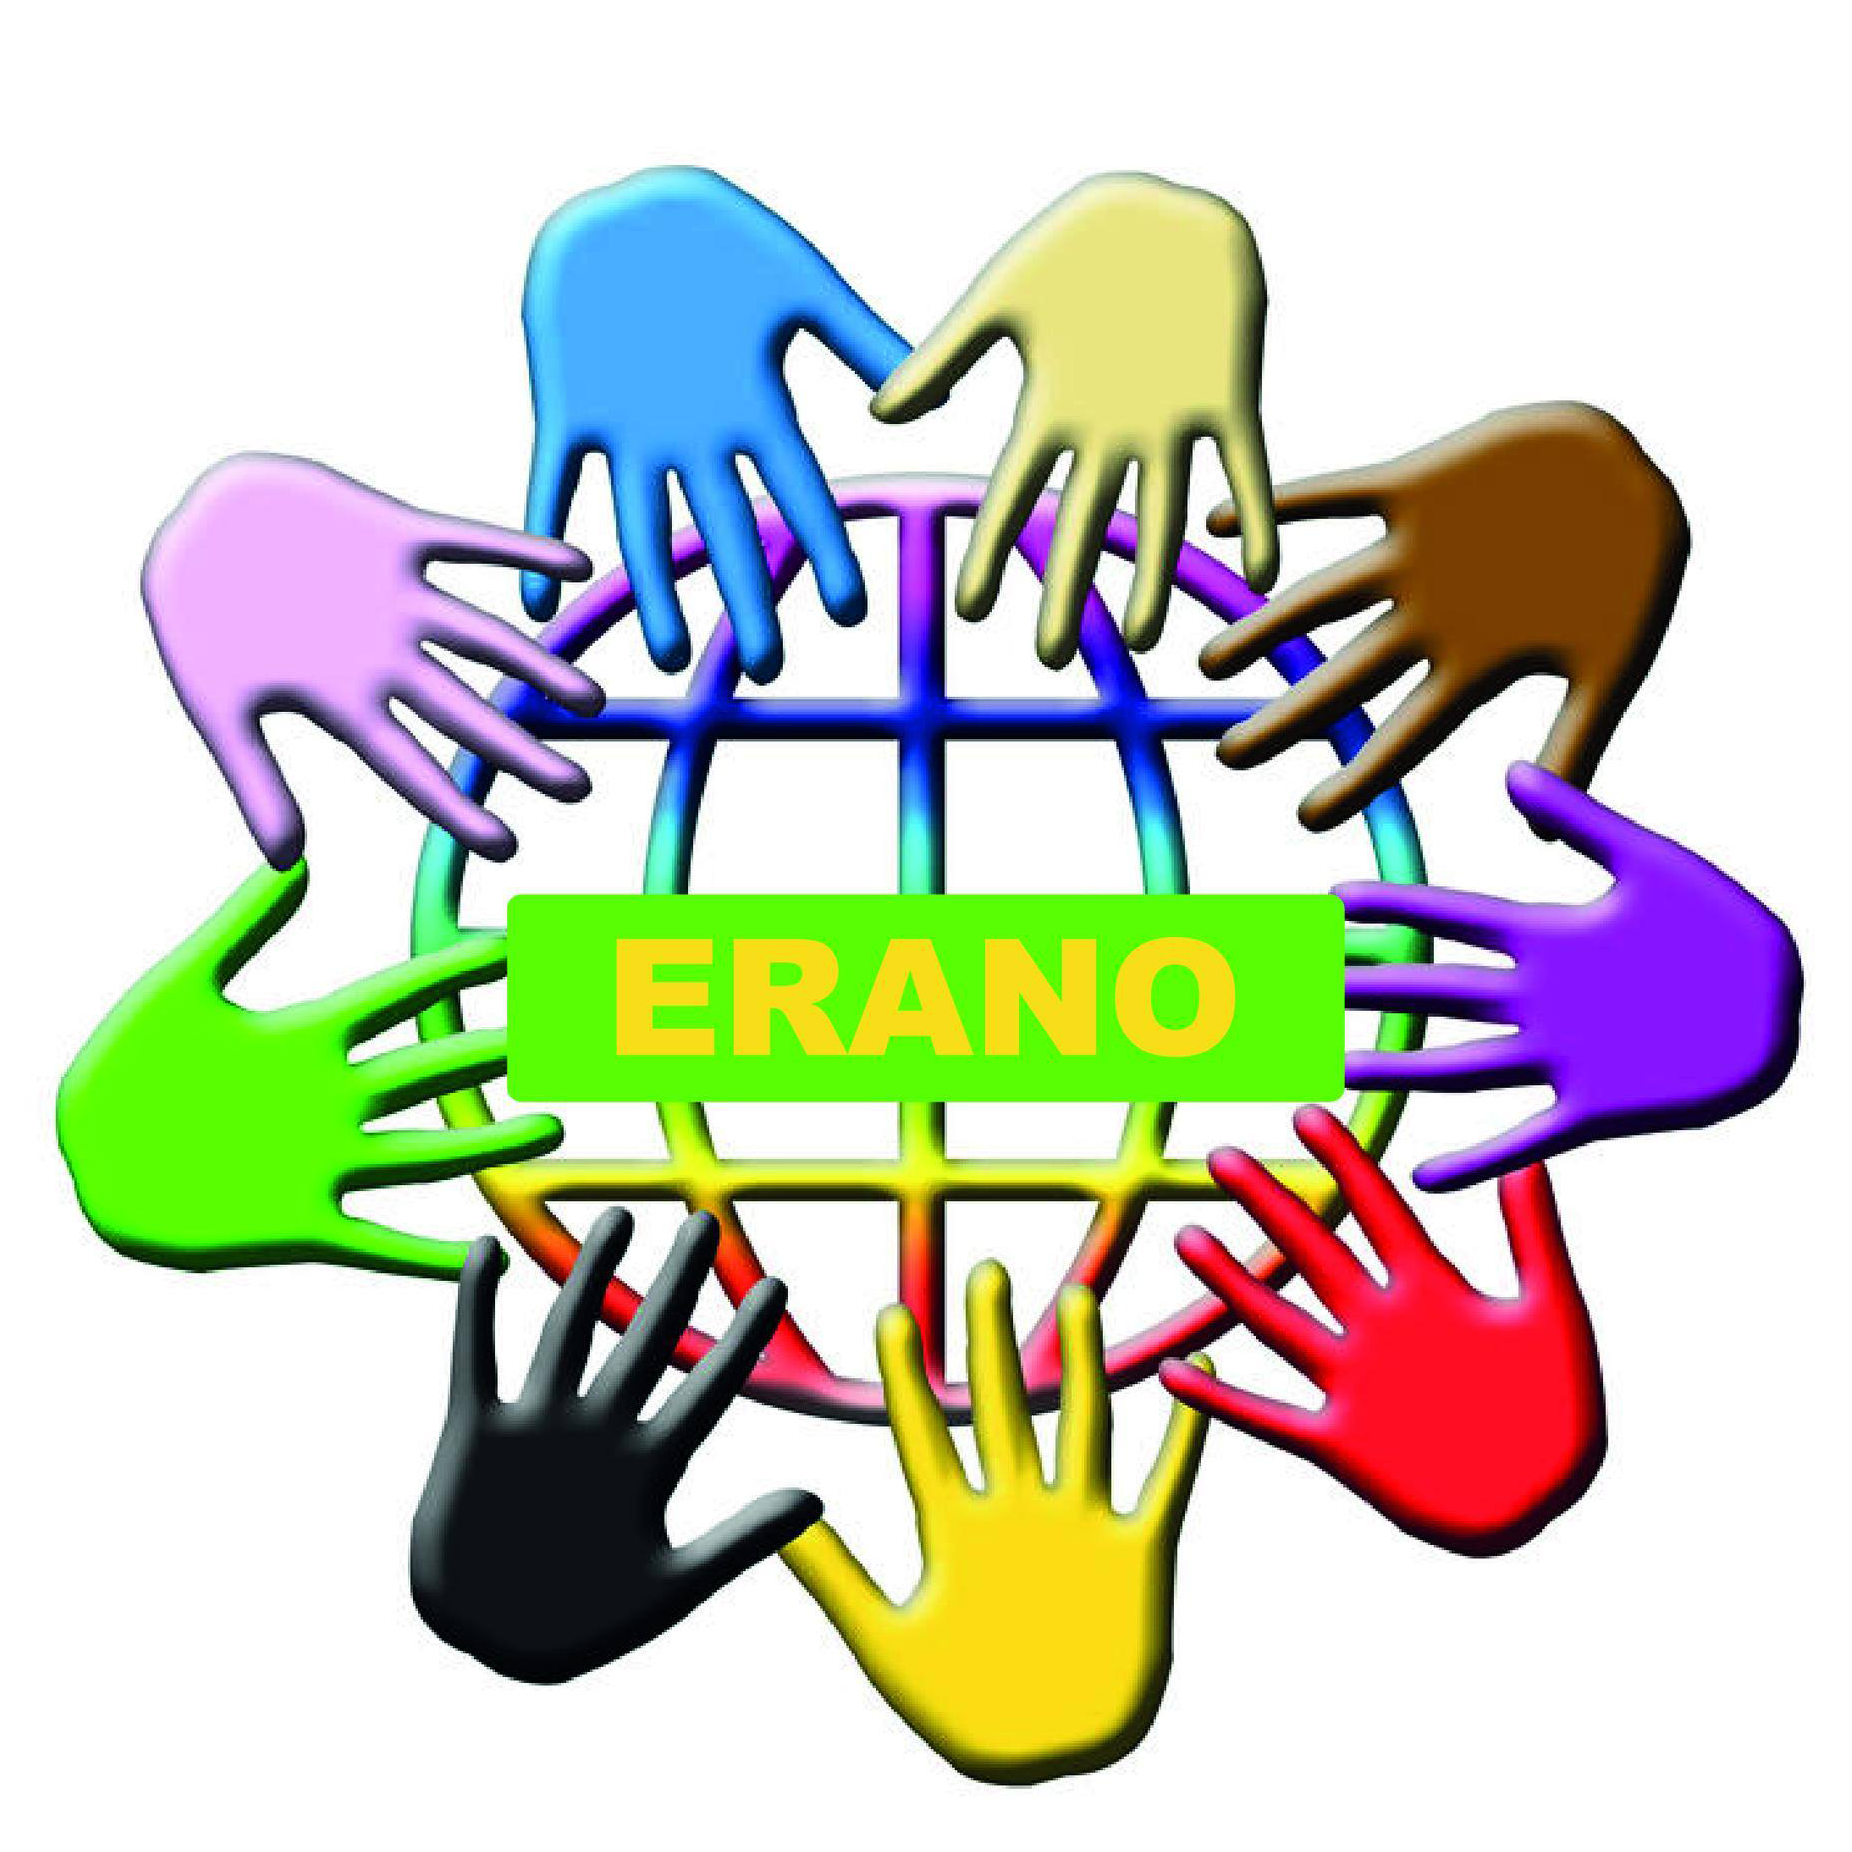 ERANO (Empowering Refugees and Newcomers Organisation)